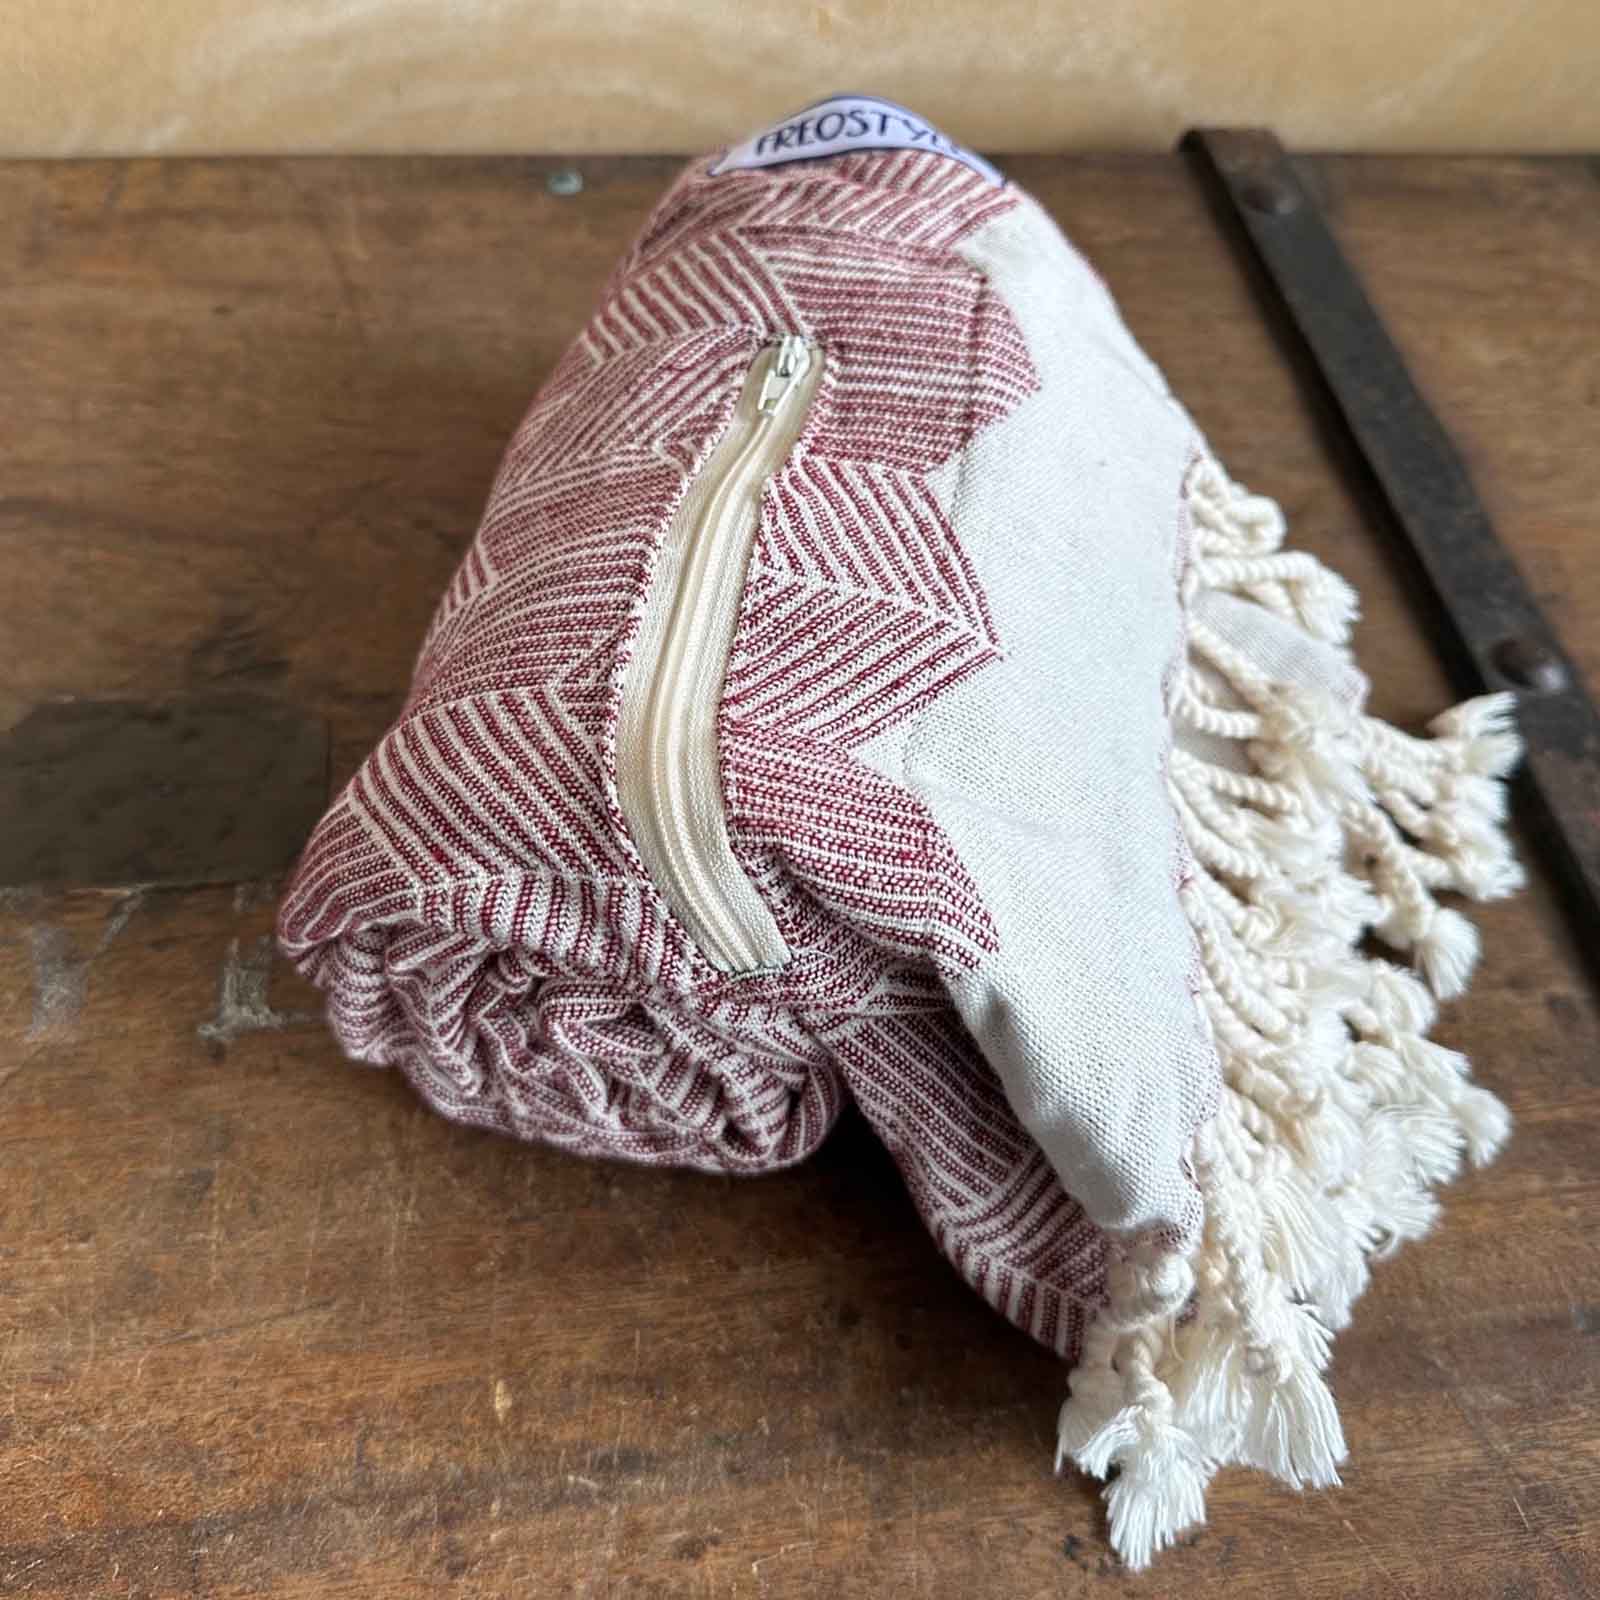 Biarritz Turkish Towel with Pocket, made by Freostyle, rolled